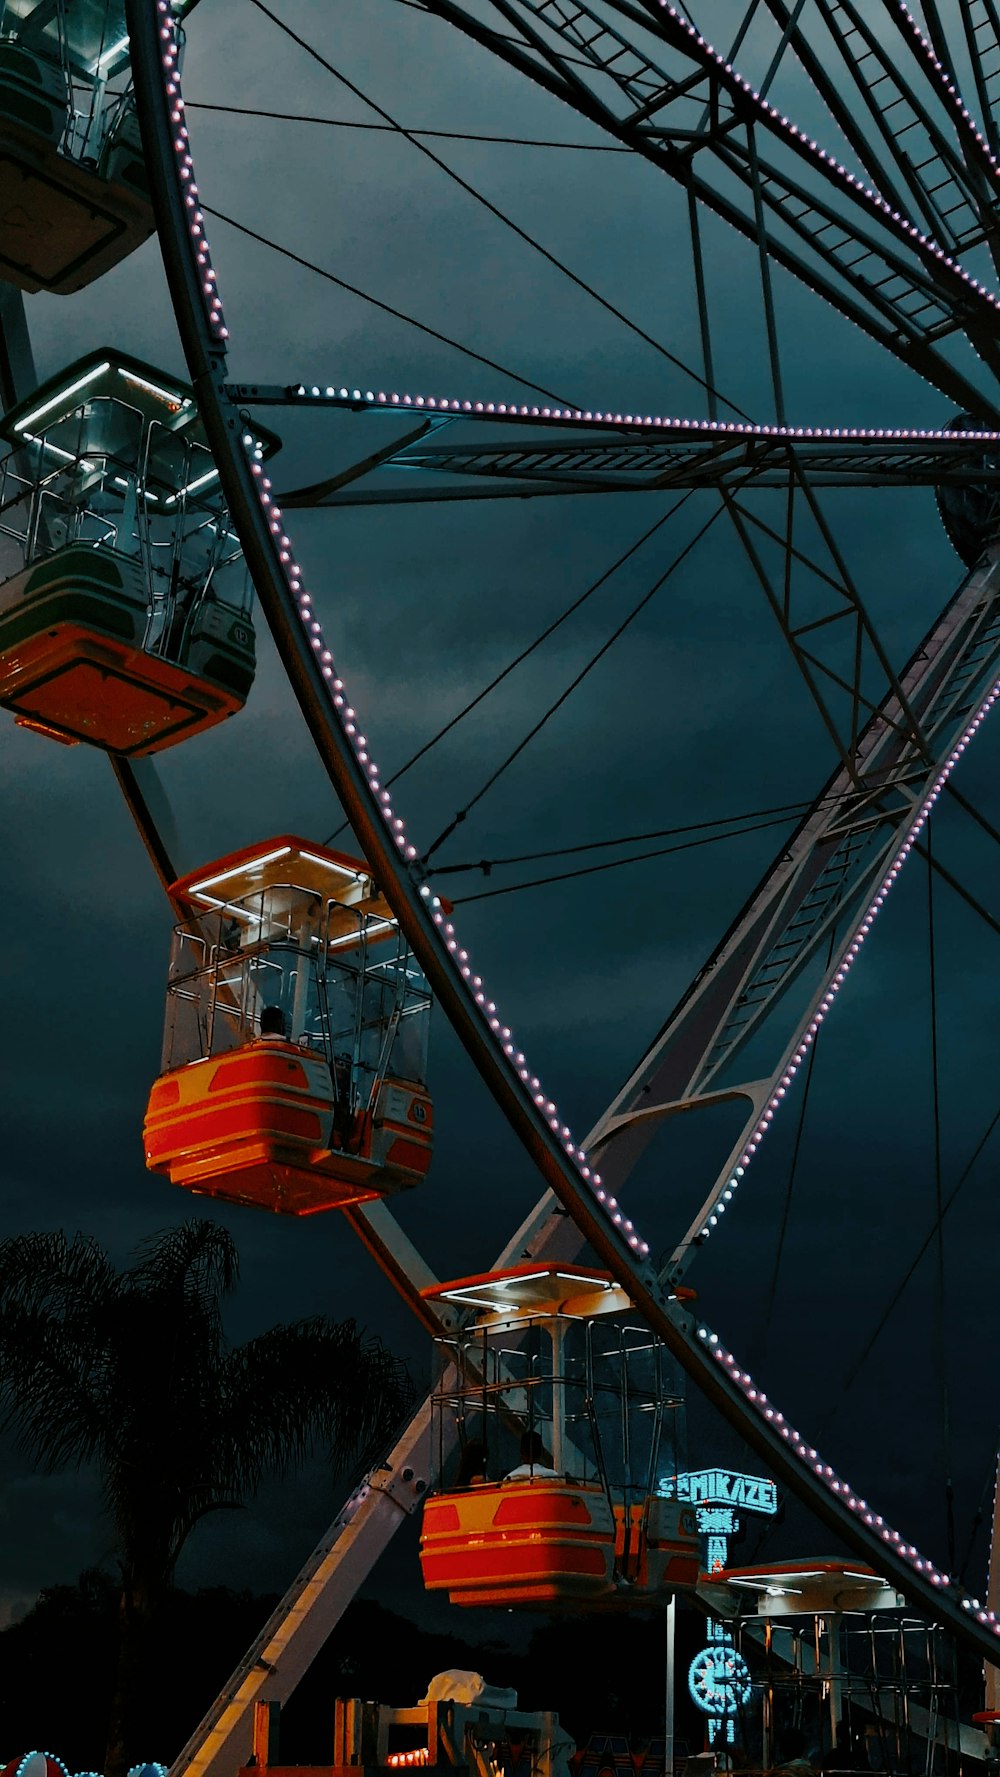 a ferris wheel at night with lights on it